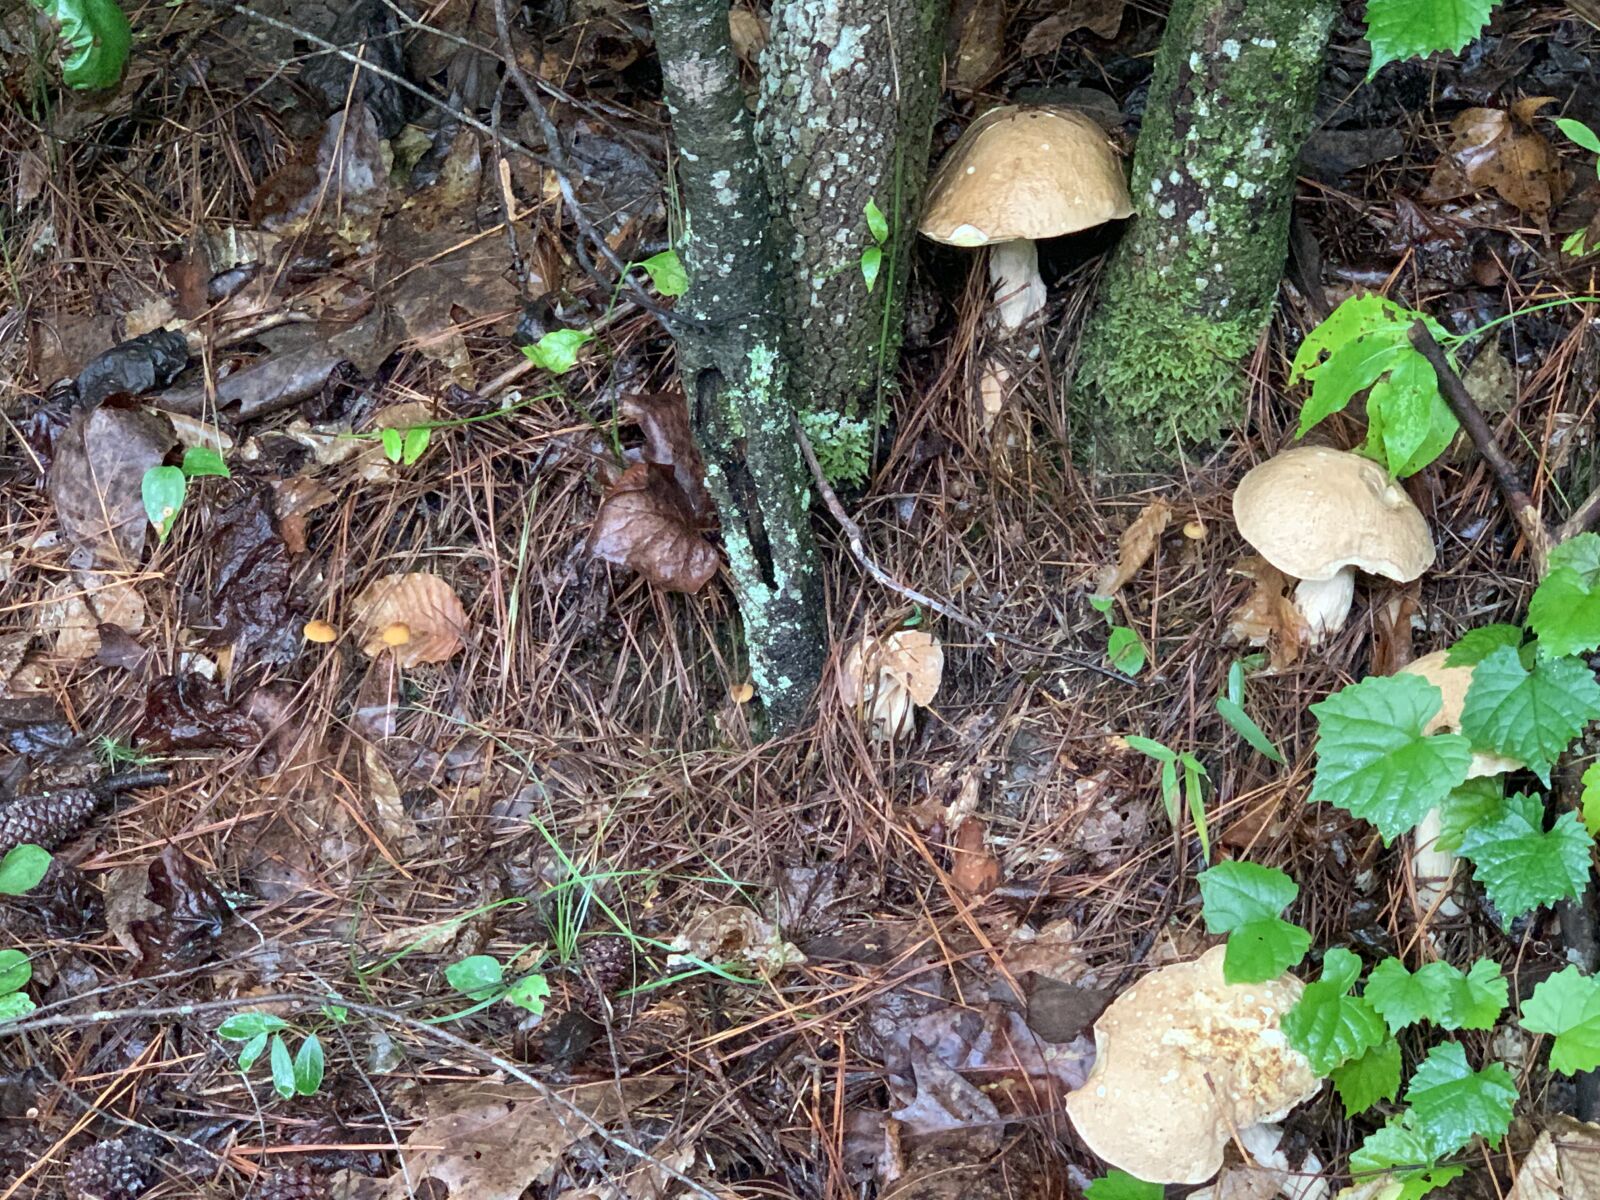 iPhone XS Max back dual camera 6mm f/2.4 sample photo. Forest, mushrooms, nature photography